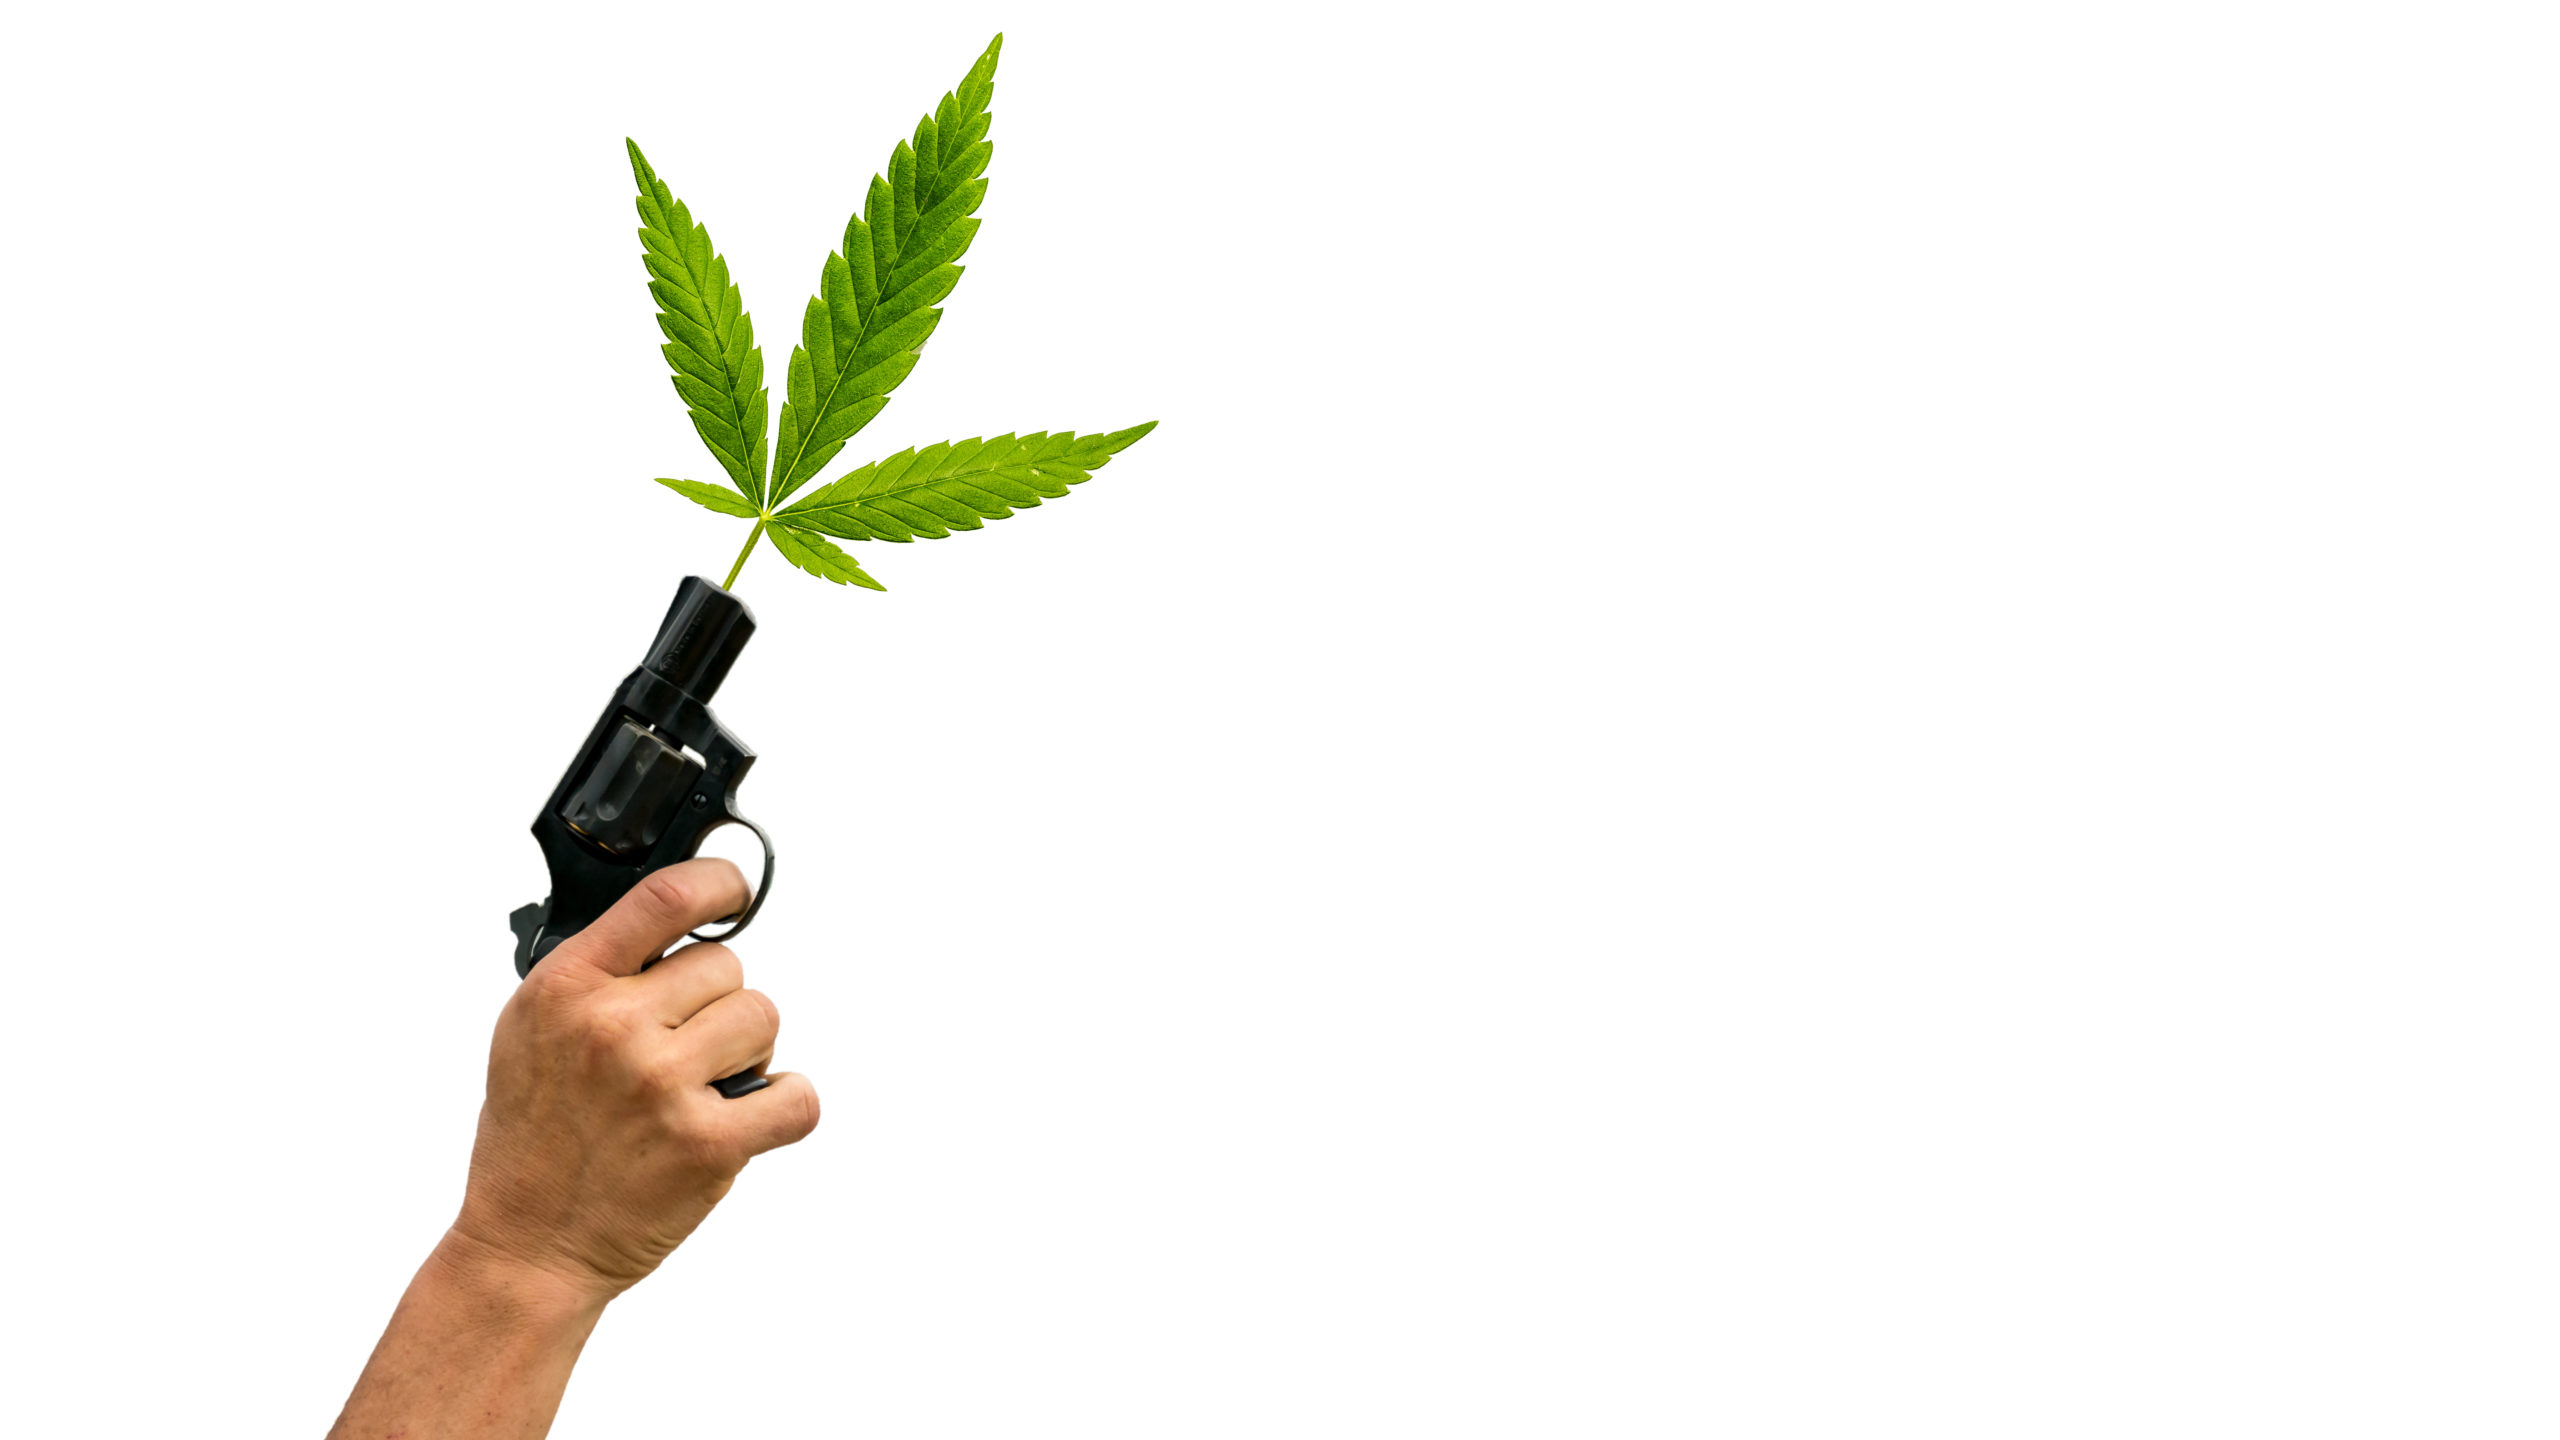 Can I Own a Gun with a Medical Marijuana Card in Connecticut?